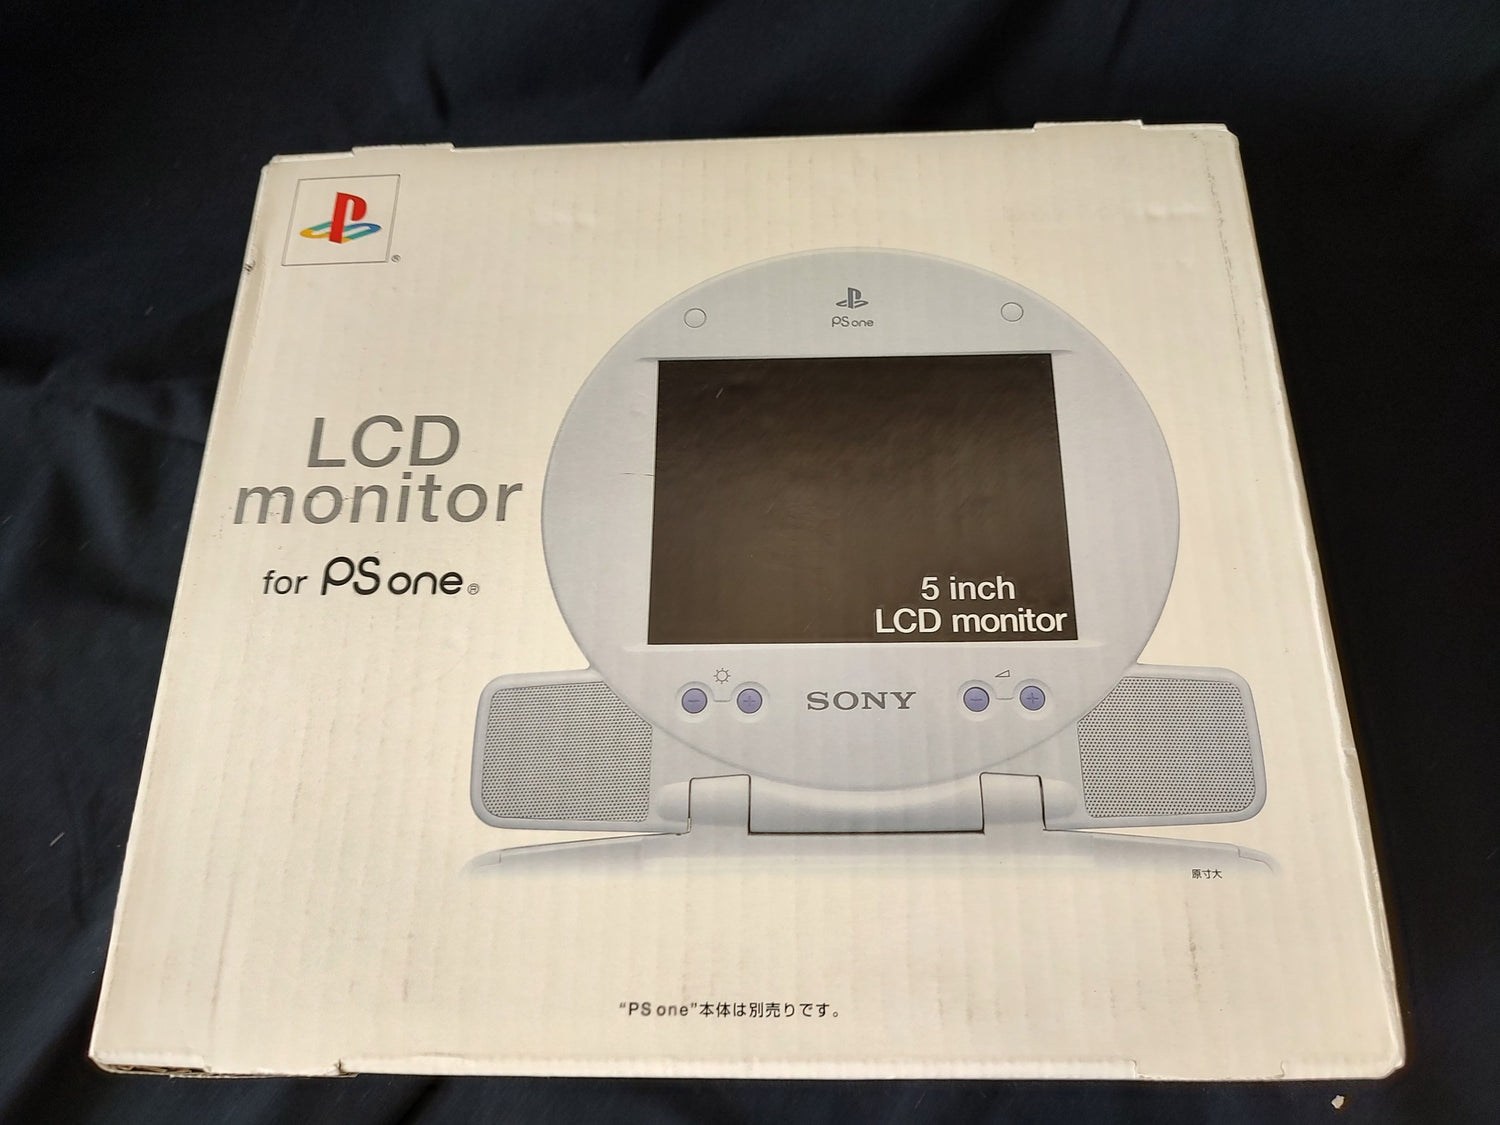 Sony PlayStation PS one Console,LCD monitor,PSU and Controller set